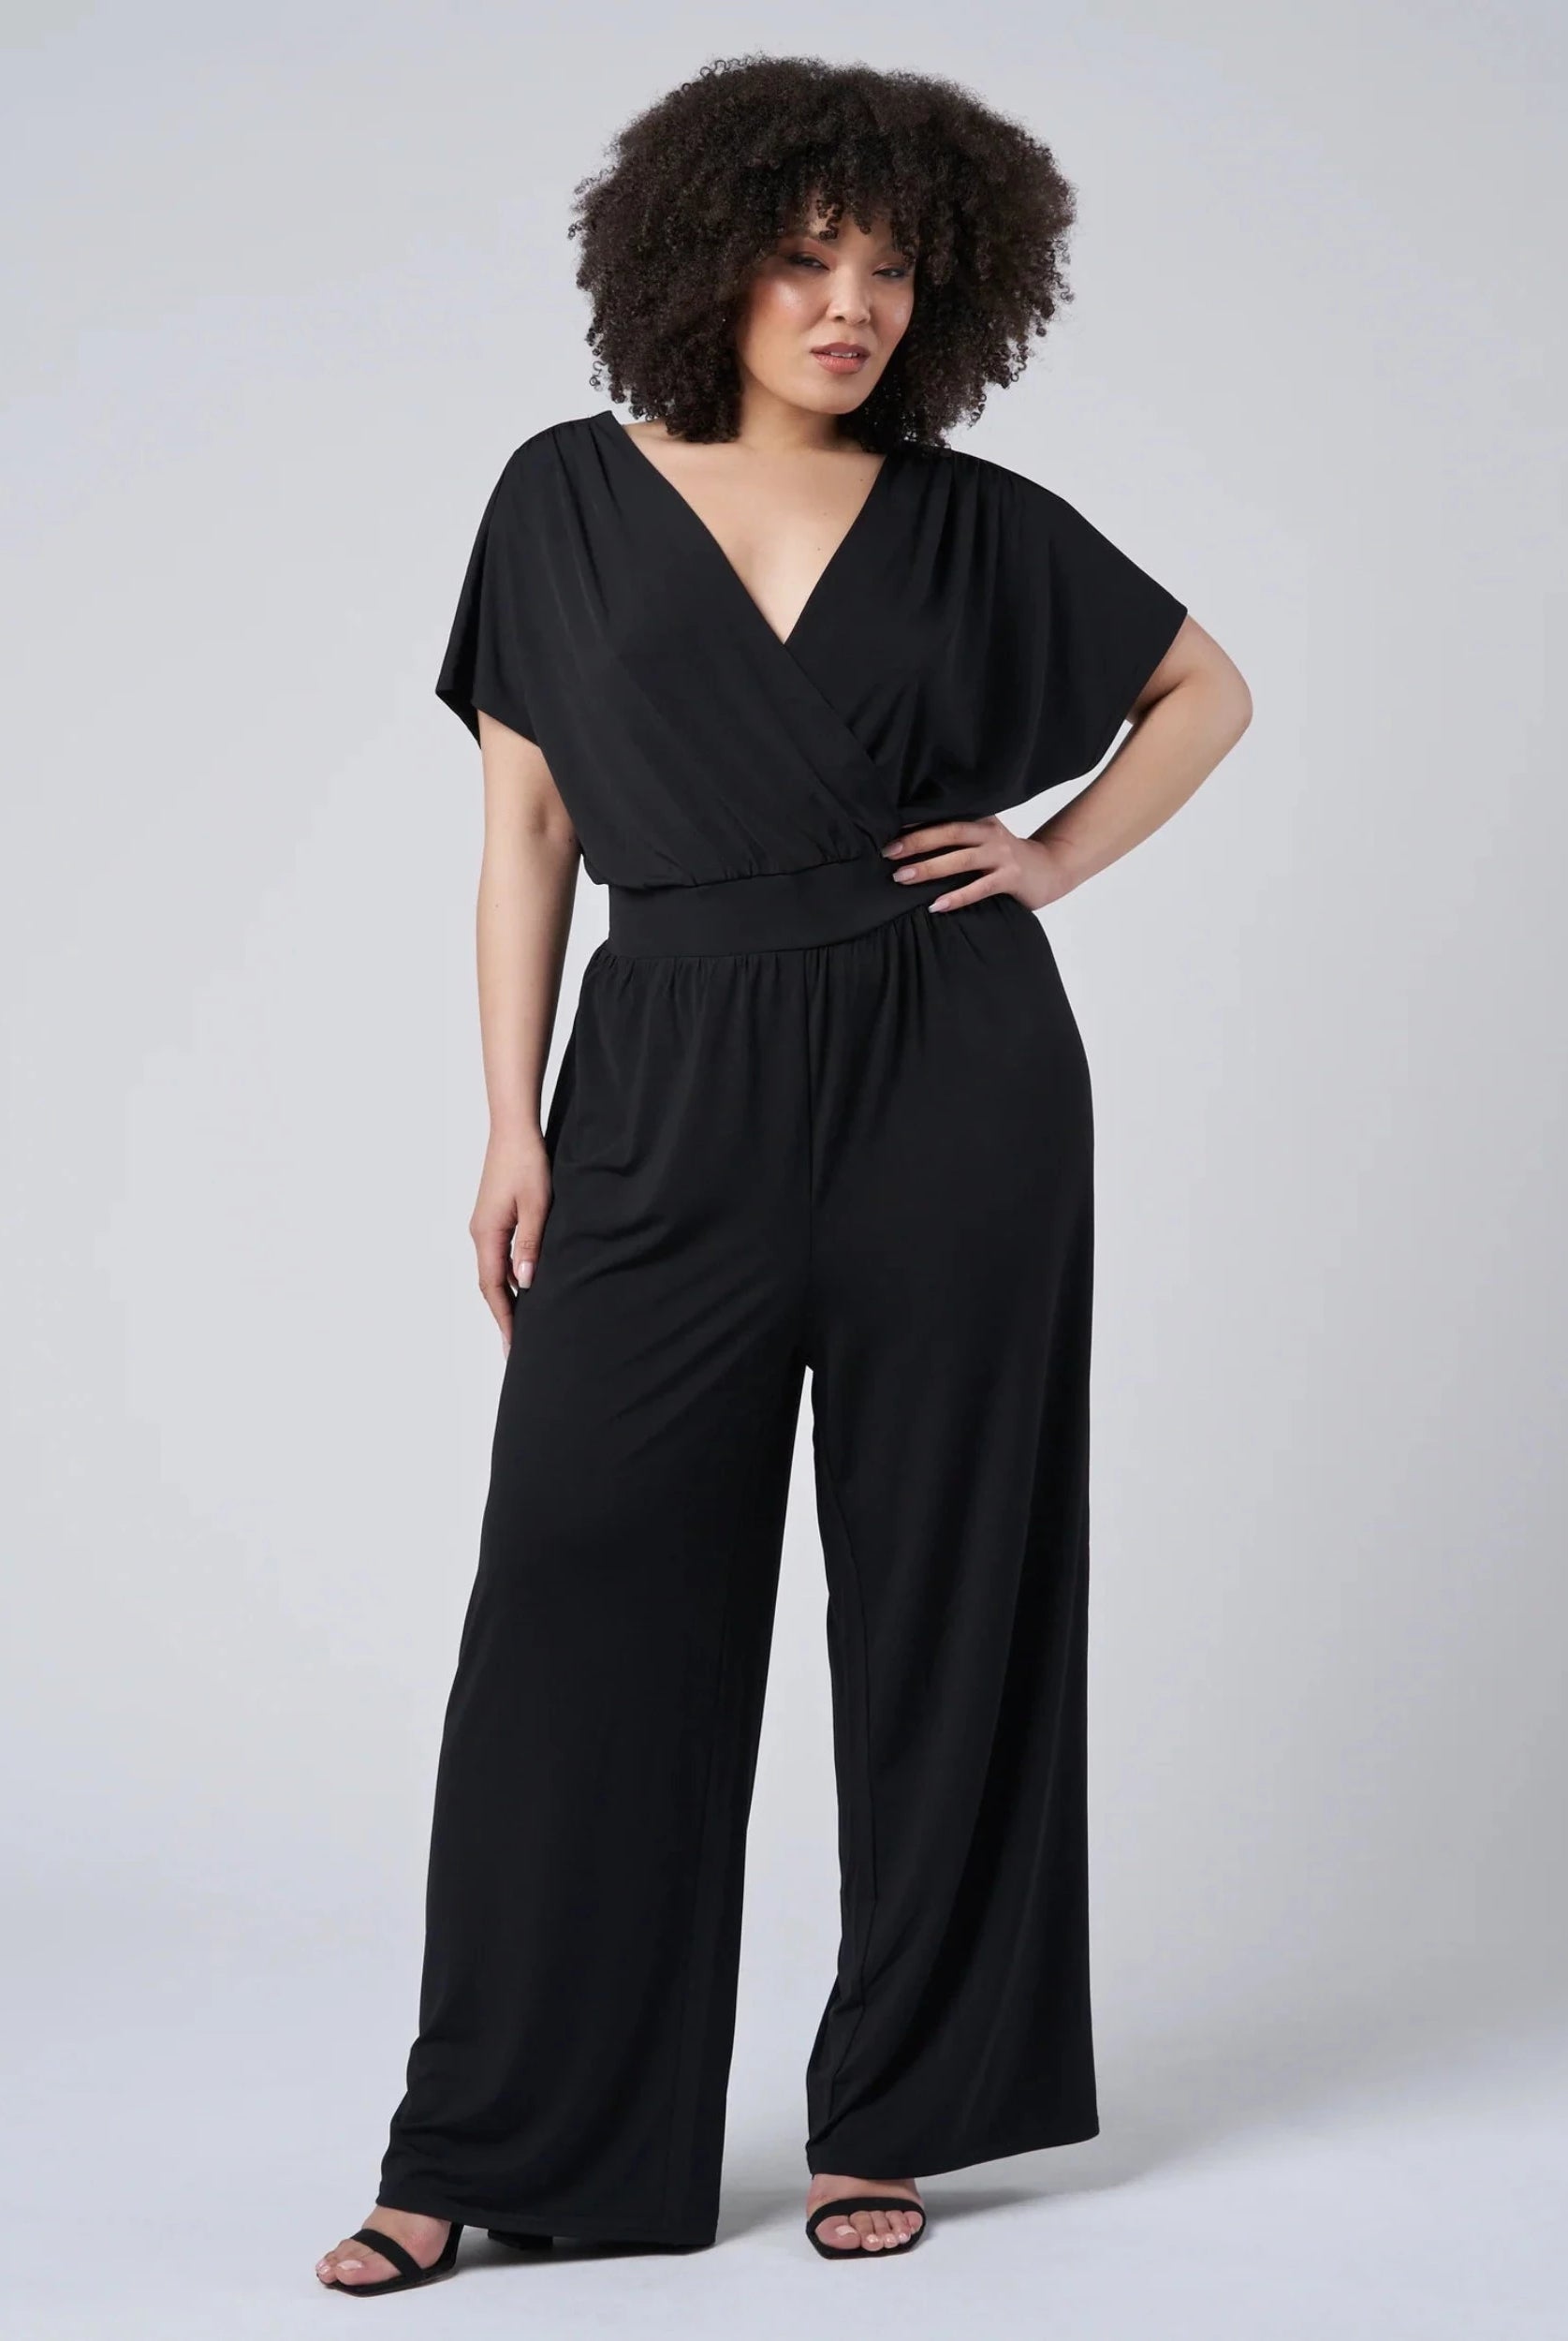 Black jersey jumpsuit with wrap top detail and low back